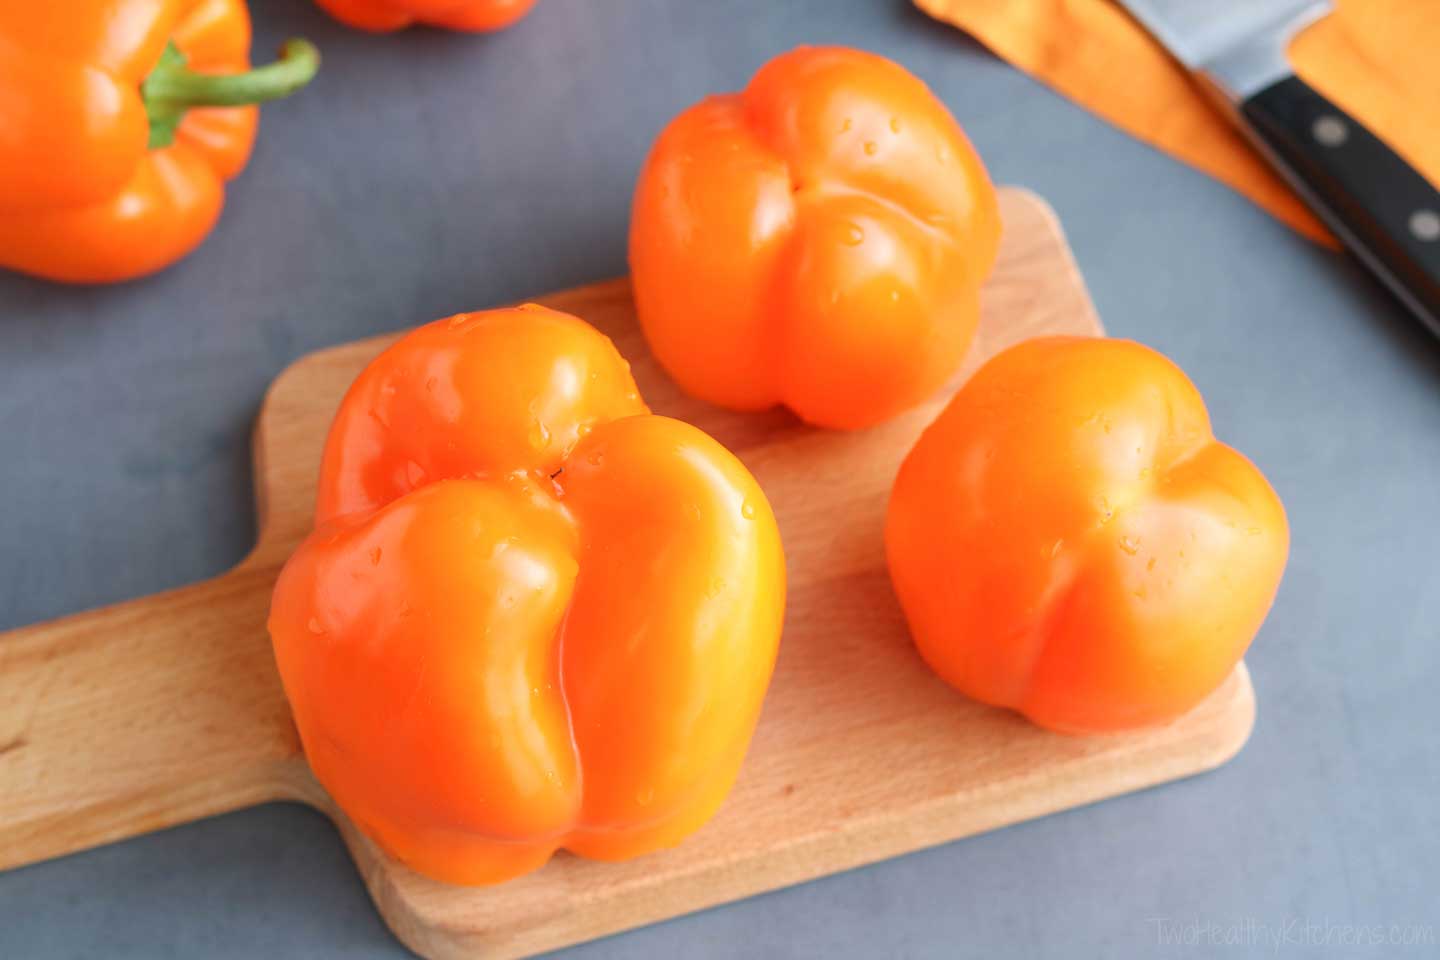 The easiest way to quickly get a perfect spider body shape is simply to choose the right pepper at the market.